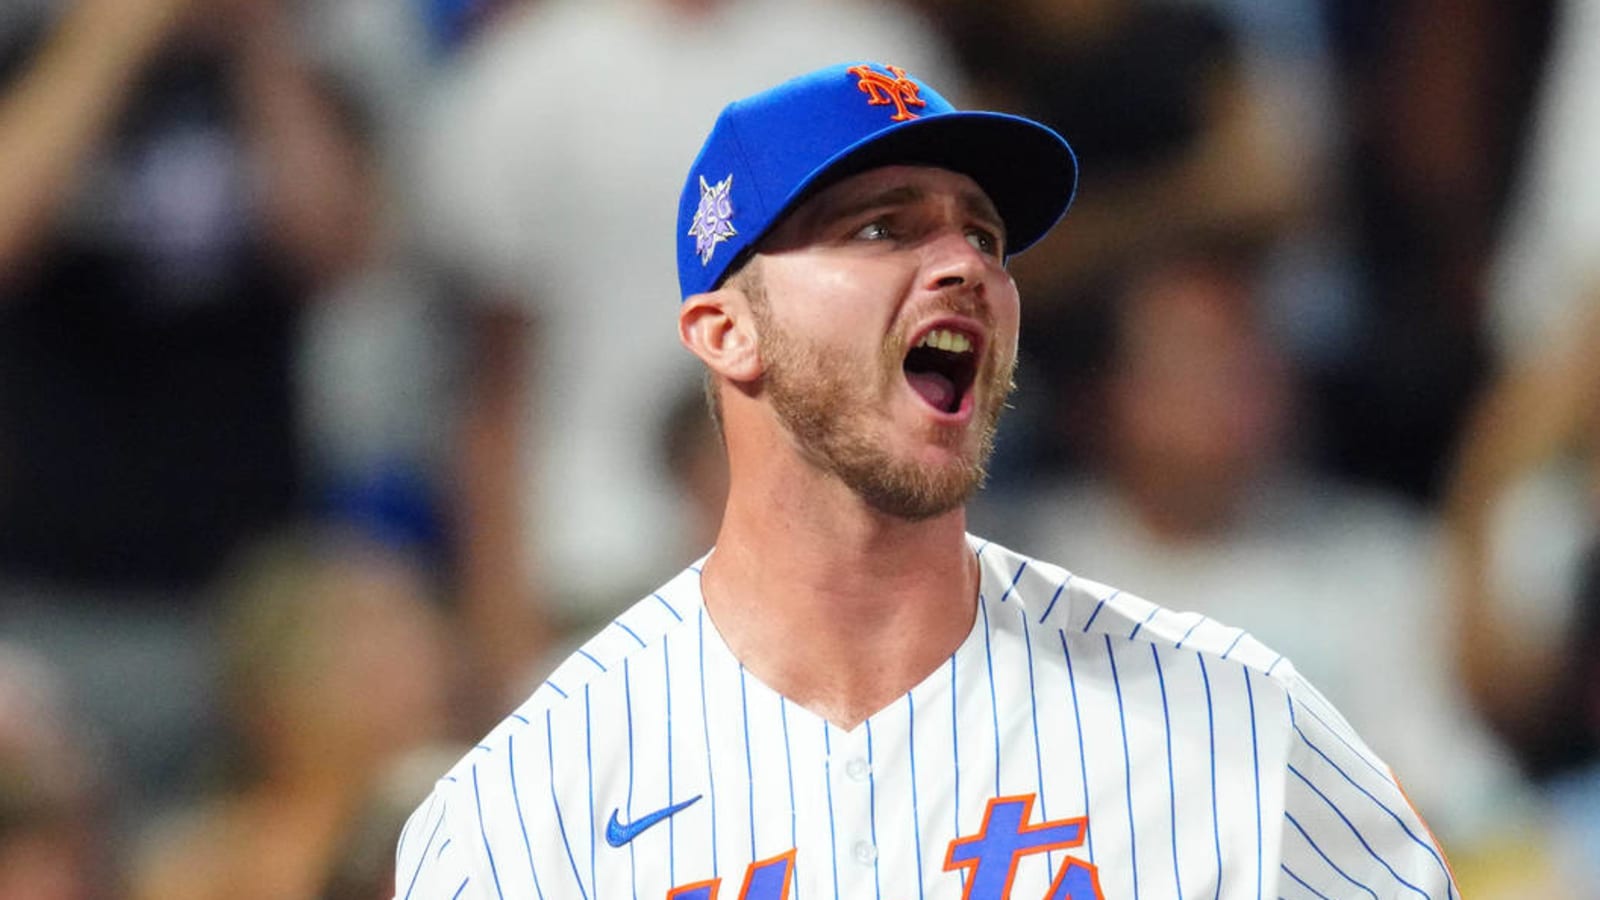 Home Run Derby has paid Pete Alonso more money than the Mets have